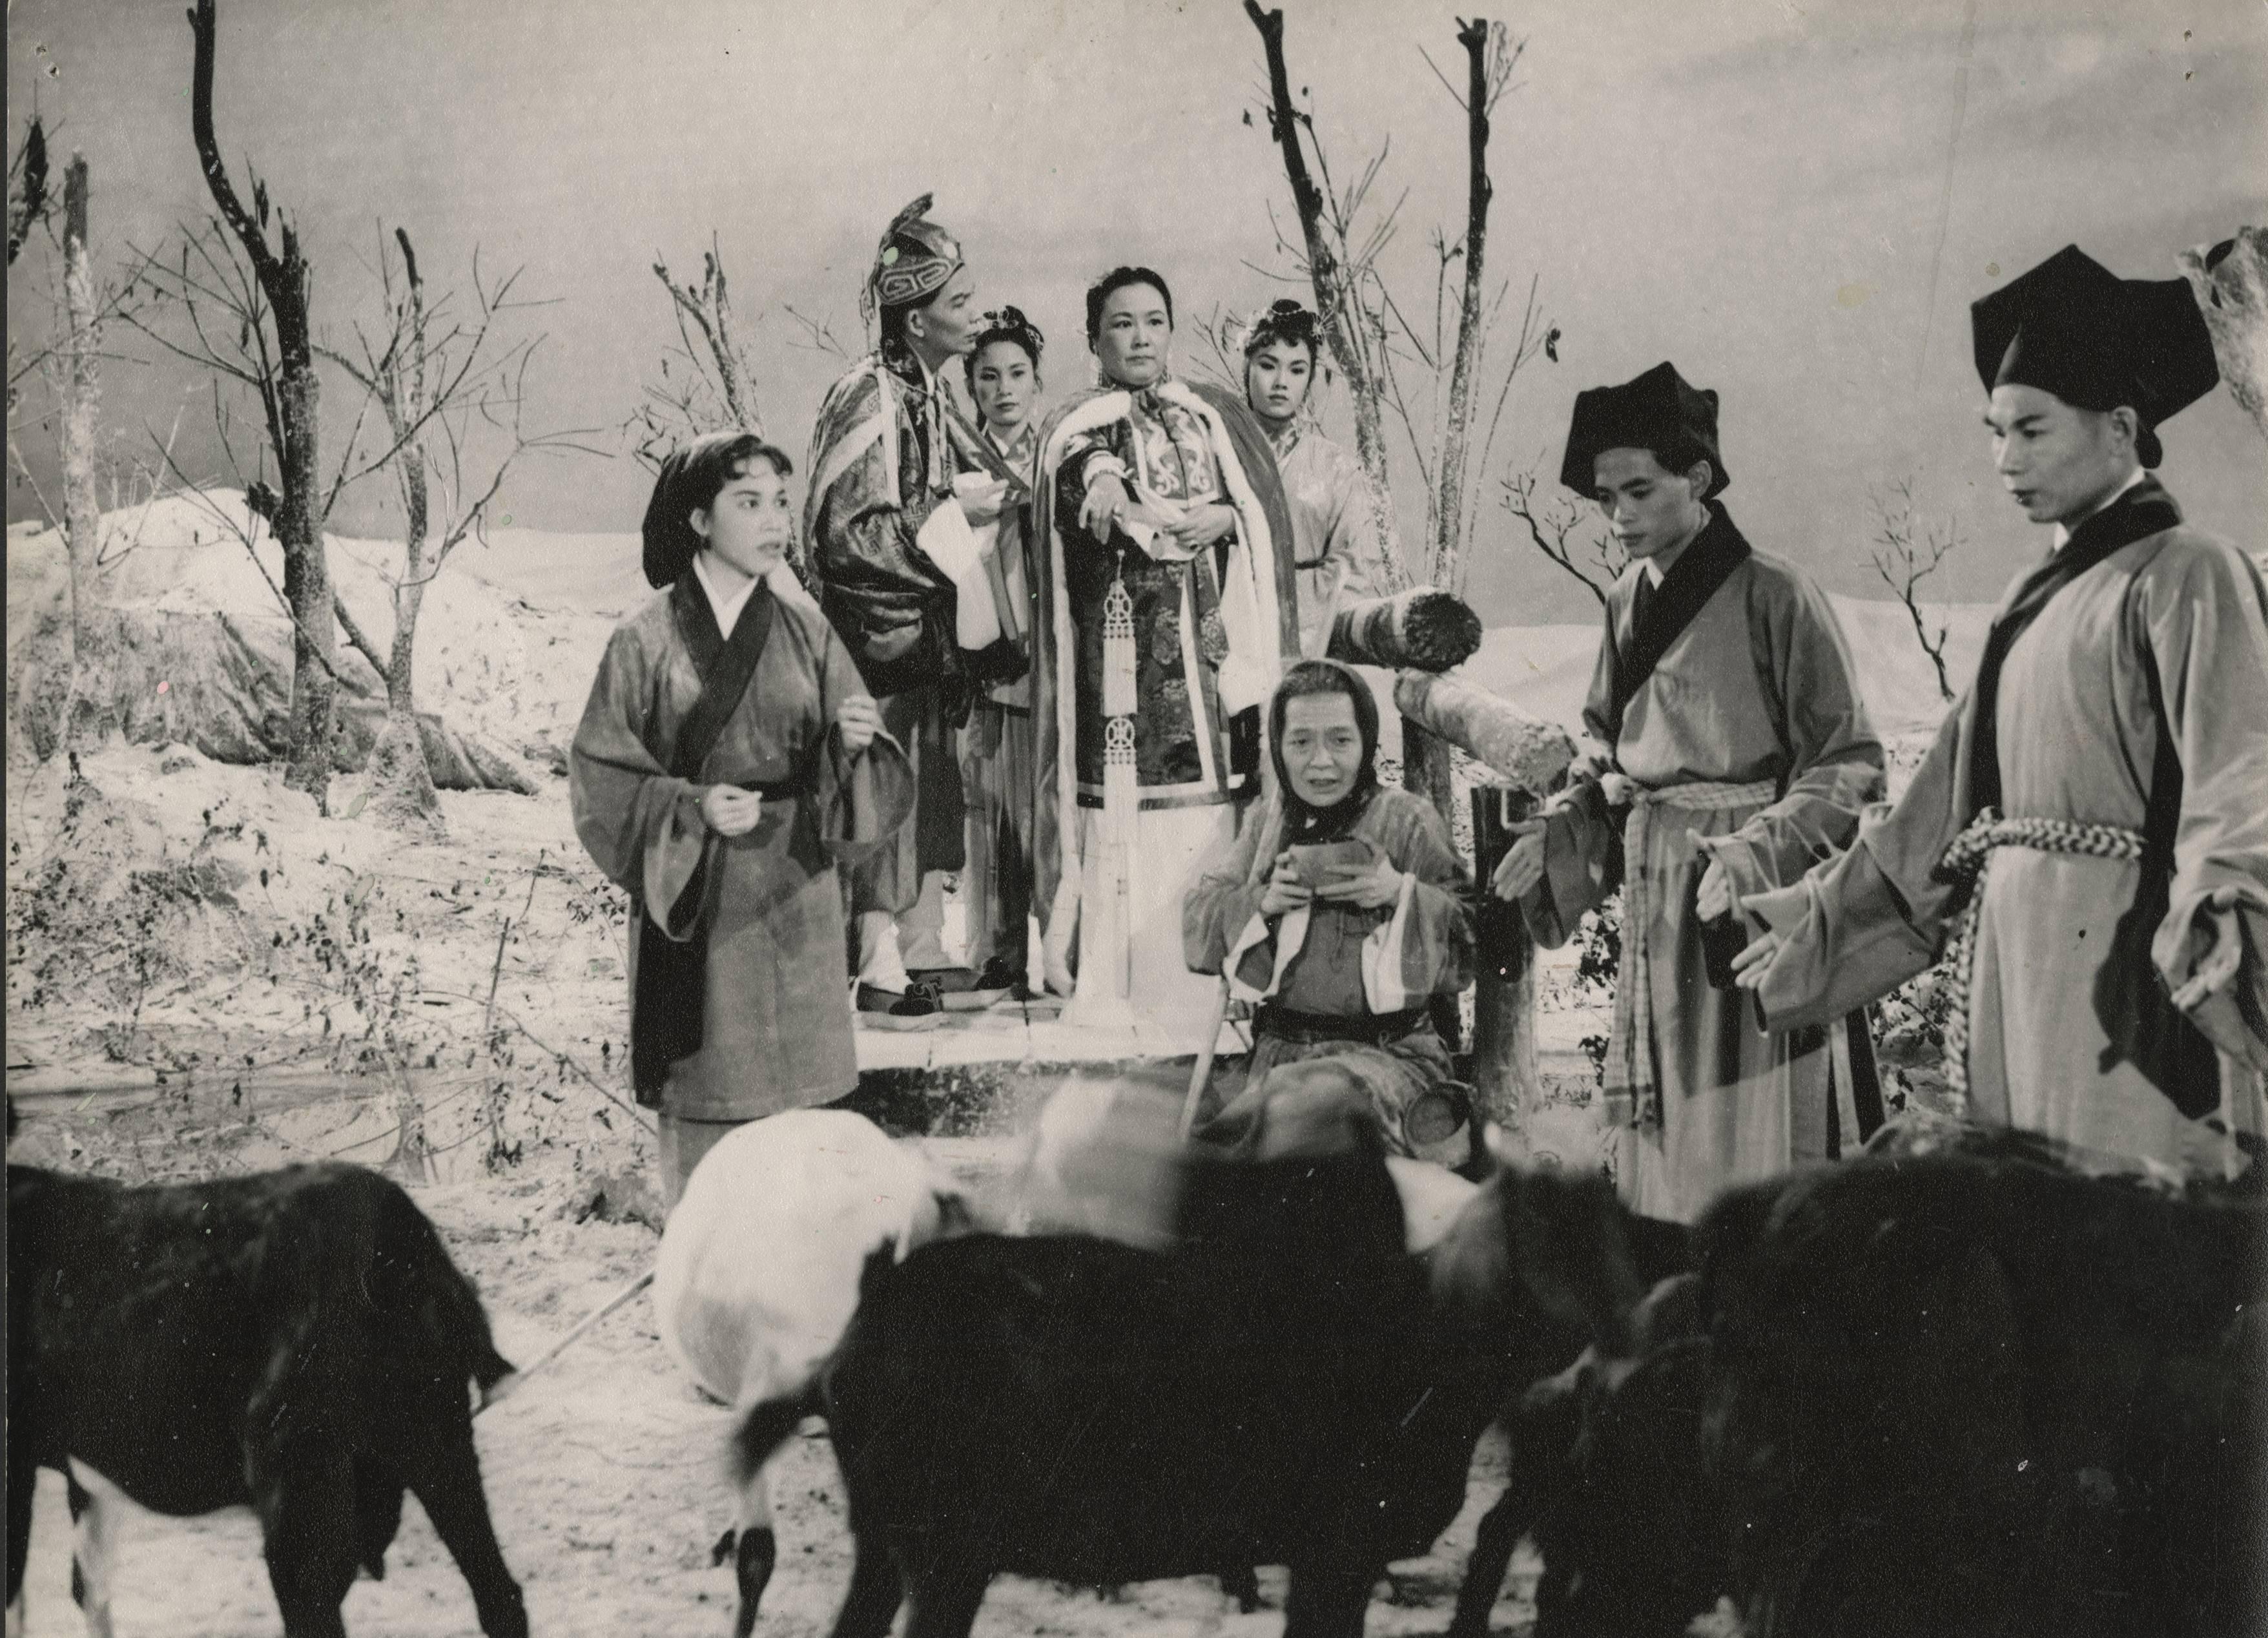 The Hong Kong Film Archive of the Leisure and Cultural Services Department will feature Fong Yim-fan as part of the "Morning Matinee" series from July to December. Eighteen of her movies will be screened at 11am on every Friday, enabling film lovers to revisit the superb acting skills of the Queen of Huadan (female lead). Photo shows a film still of "A Red Spot" (1958).